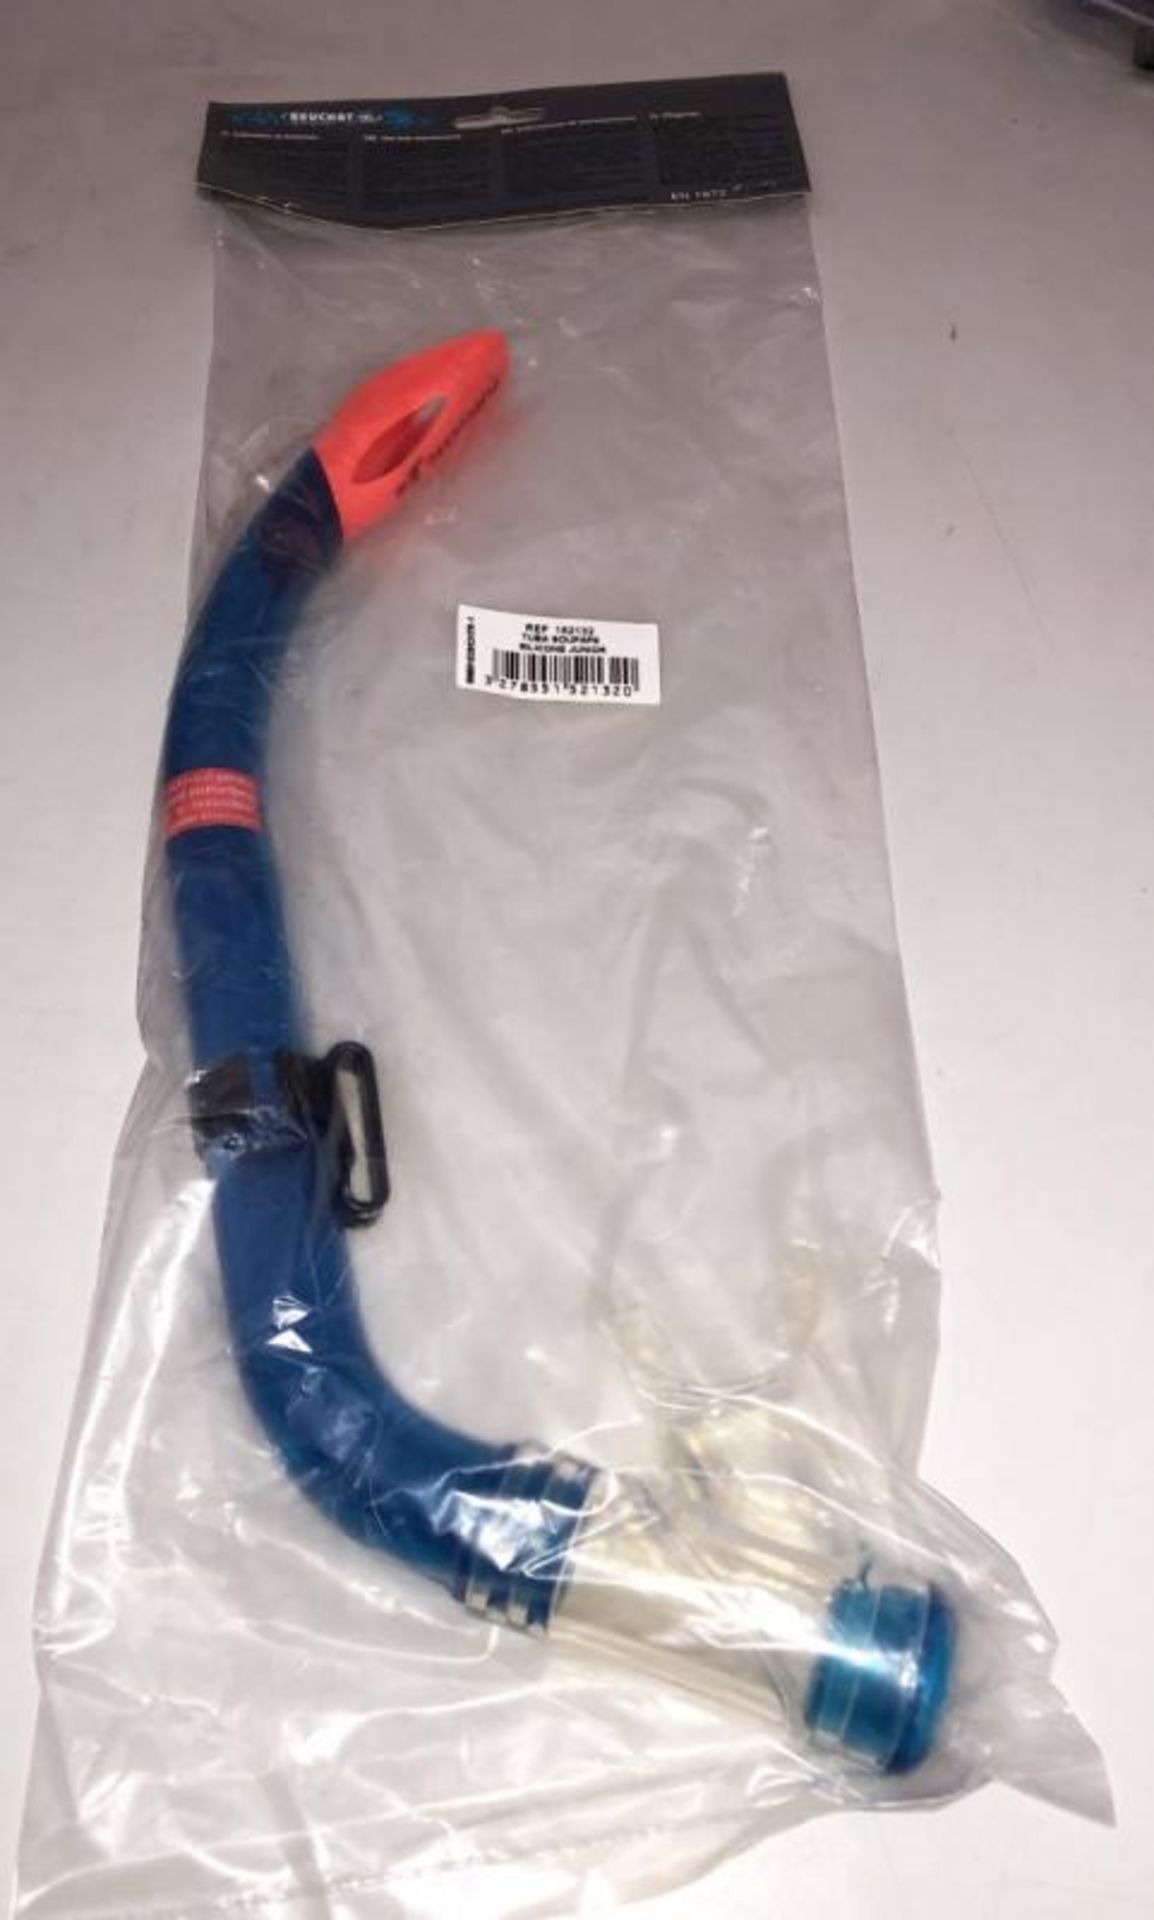 34 x Branded Diving Snorkel's - CL349 - Altrincham WA14 - Brand New! - Image 14 of 30